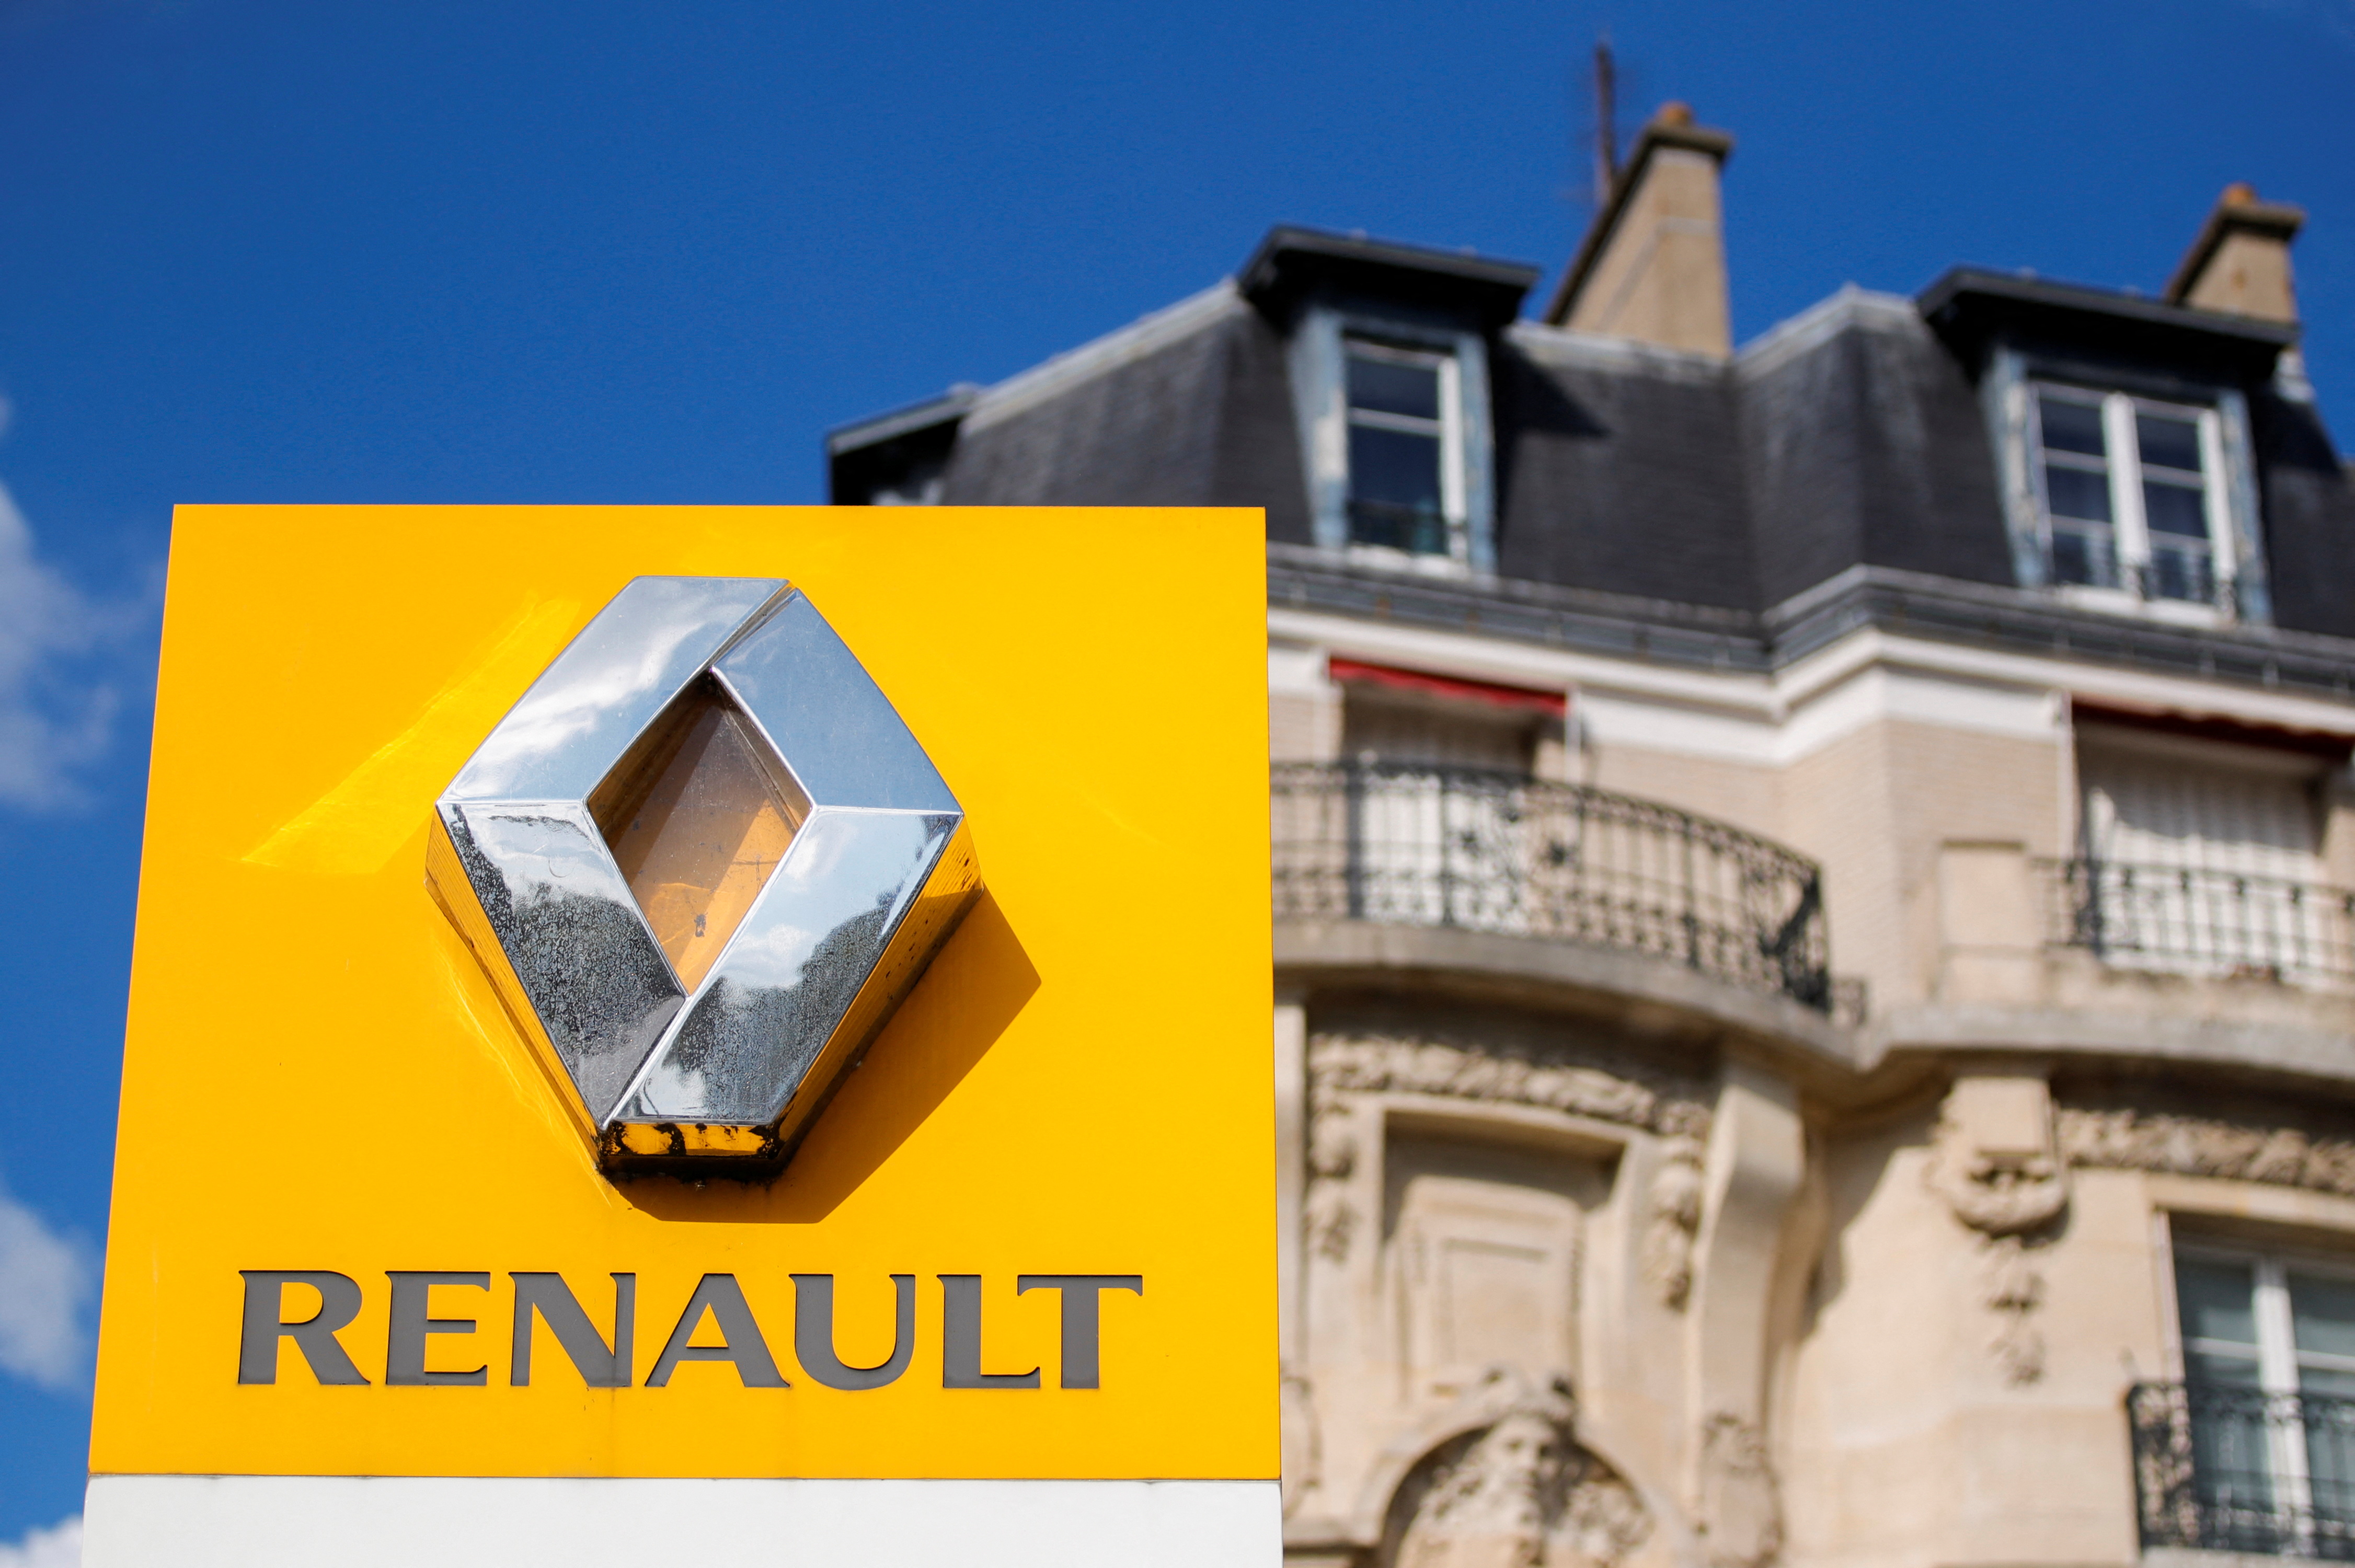 The logo of carmaker Renault is seen at a dealership in Paris, France, August 15, 2021. REUTERS/Sarah Meyssonnier